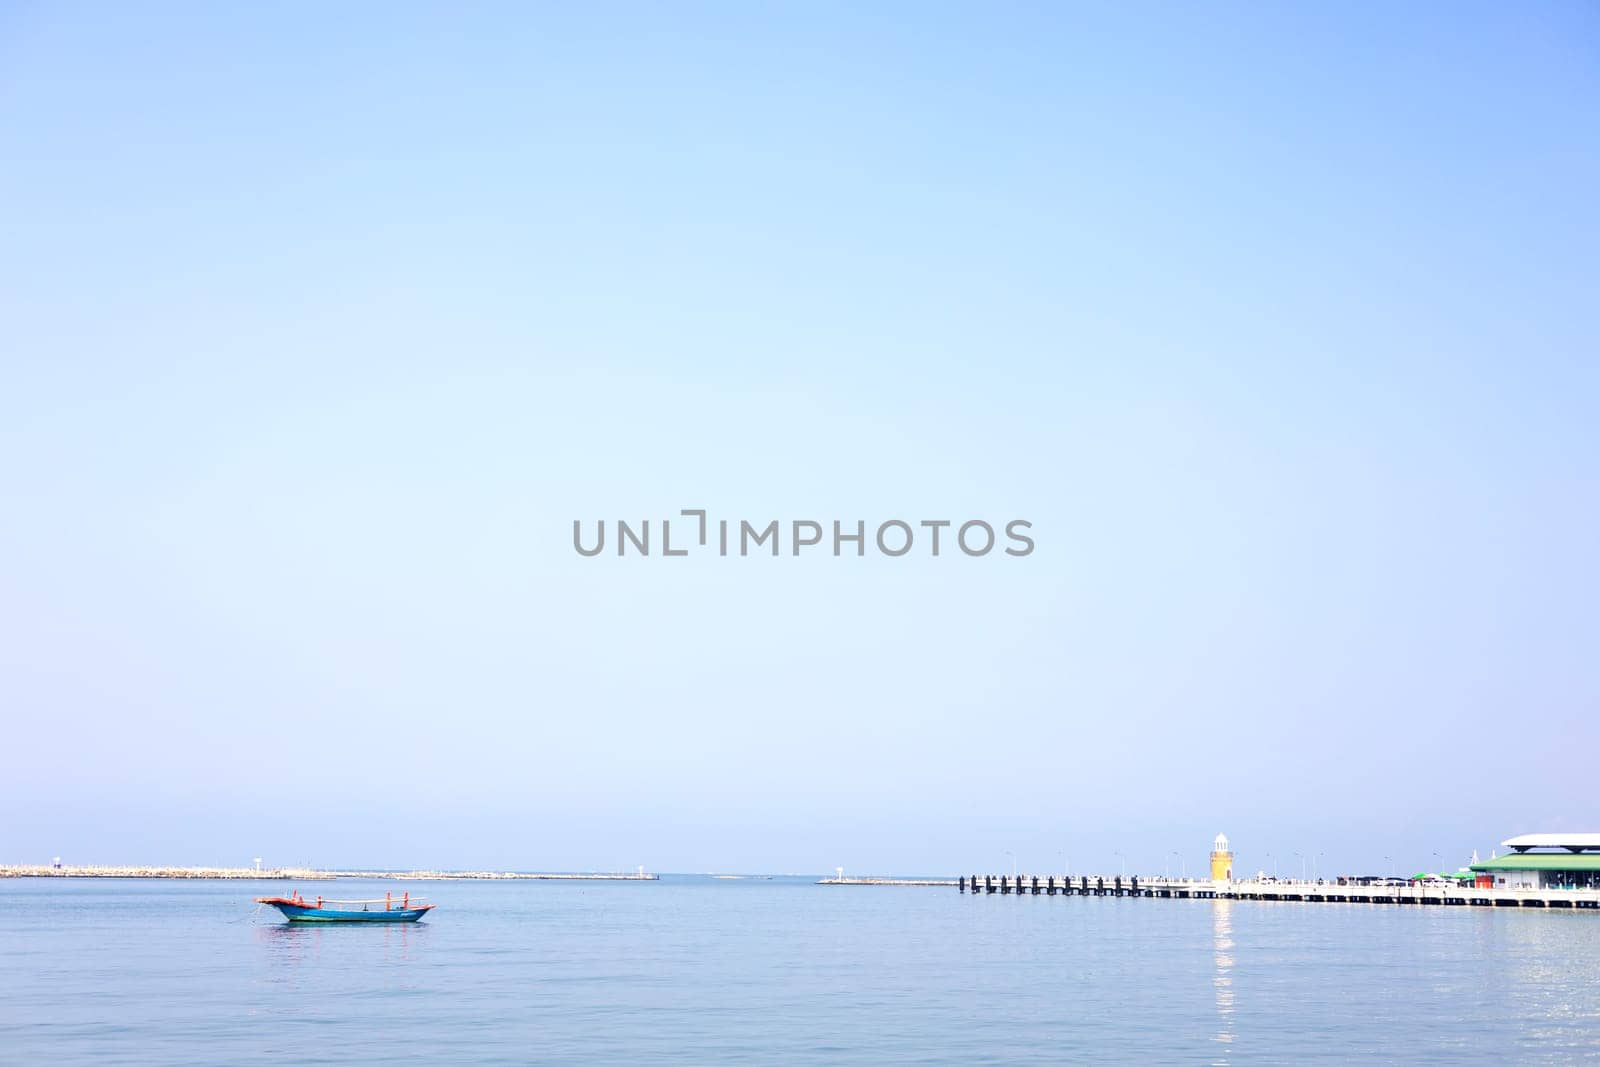 Lighthouse And Fishing Boat Over The Calm Sea. Background.